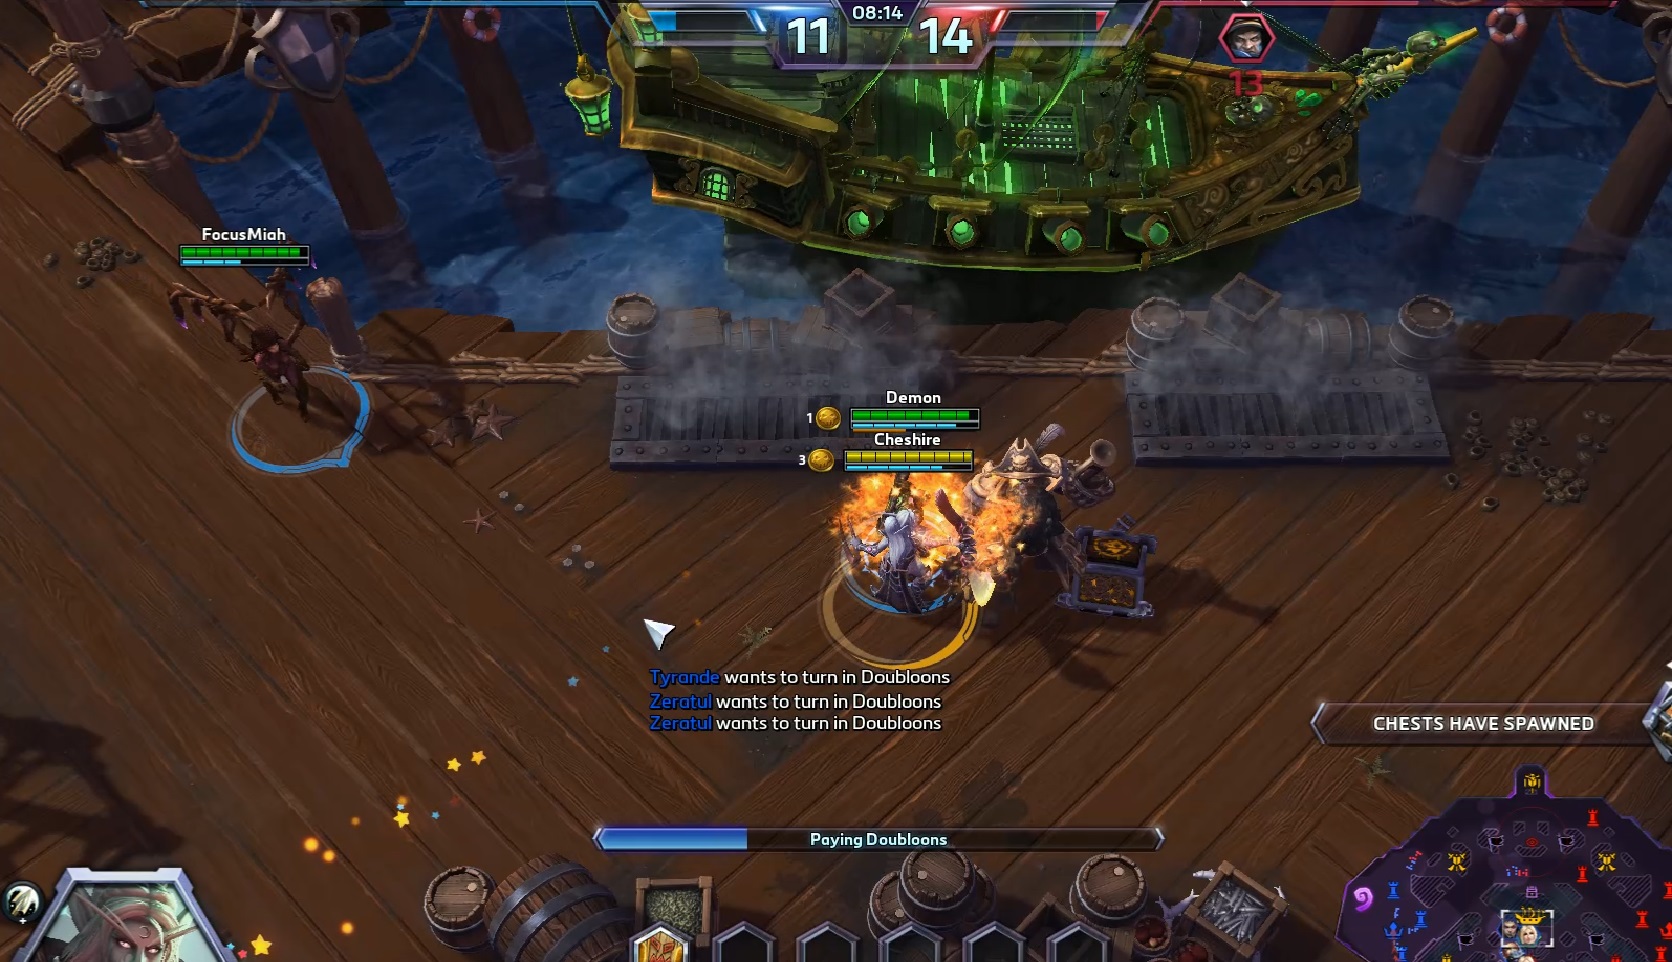 Heroes of the Storm Blackheart's Bay map